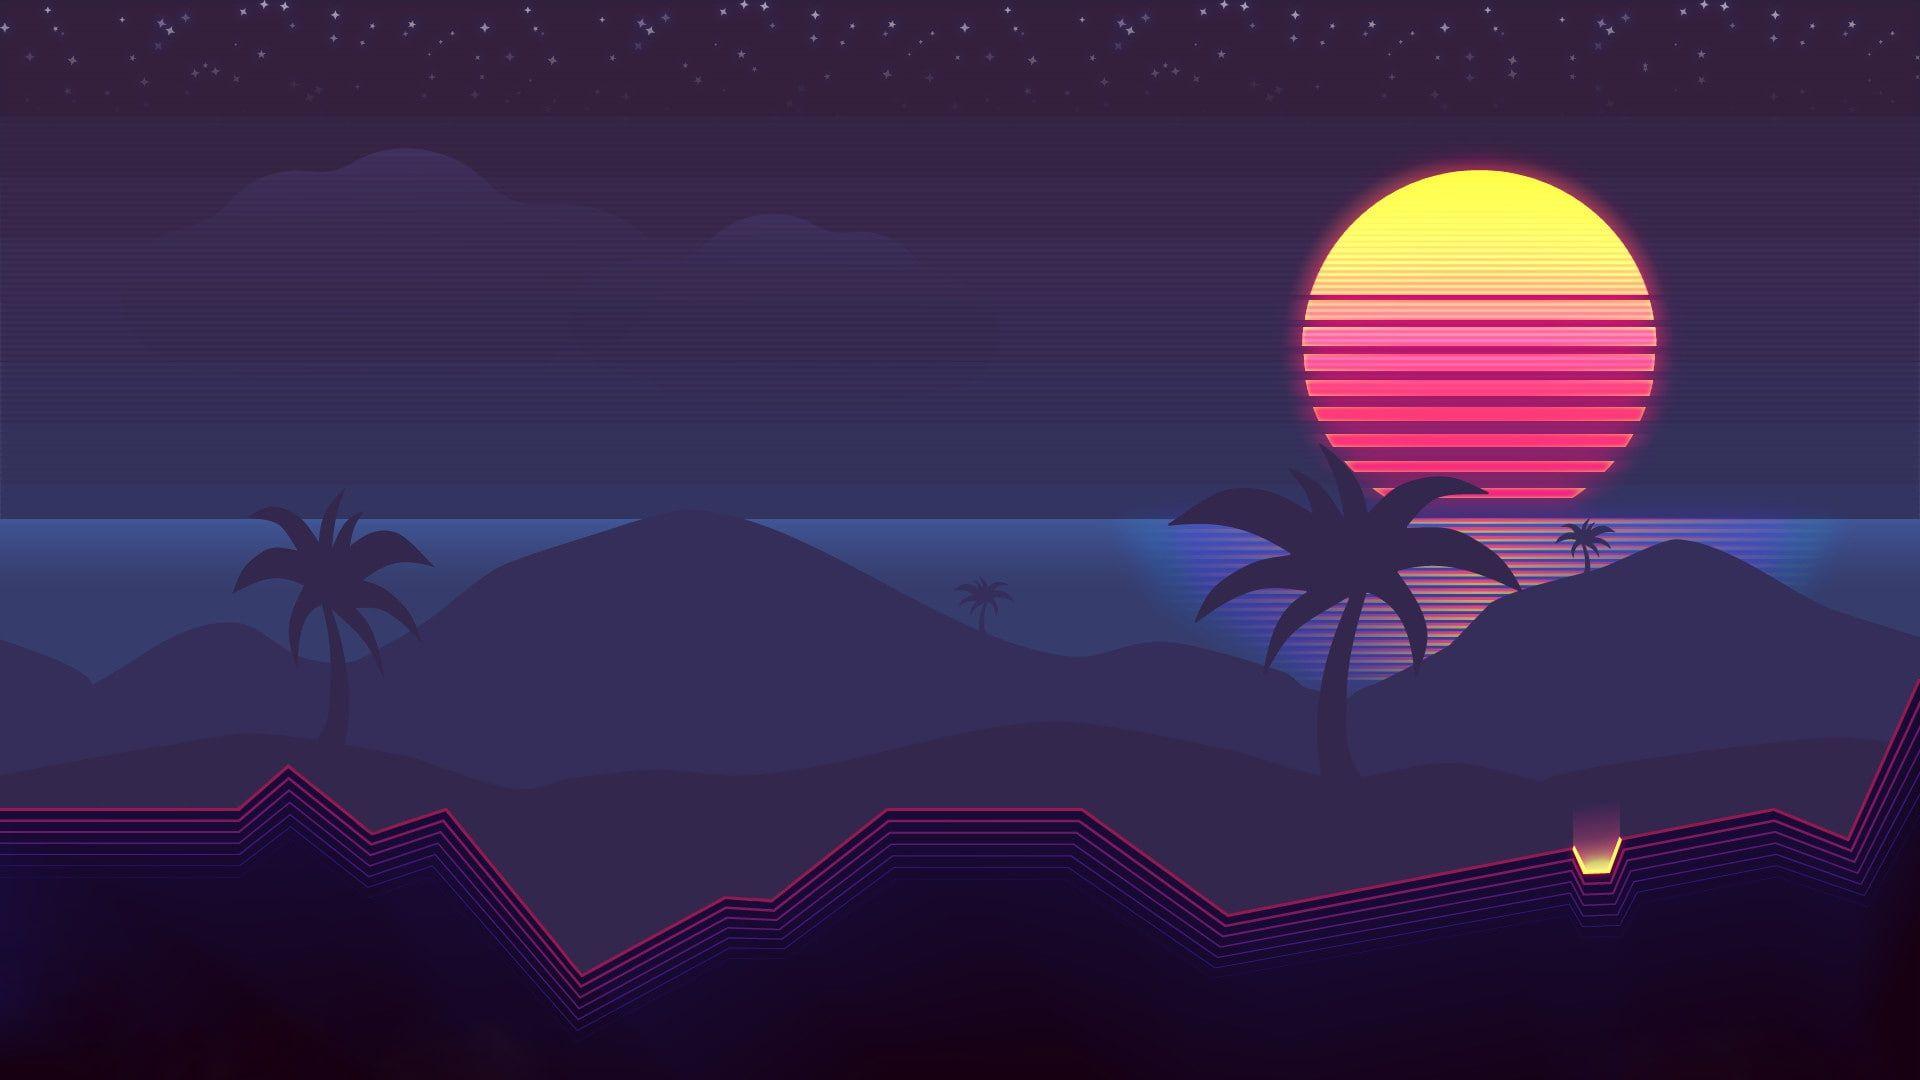 The sun #Music Palm trees #Background s #Neon 's #Synth #Retrowave #Synthwave New Retro Wave #Futures. Neon wallpaper, Heaven wallpaper, Vaporwave wallpaper